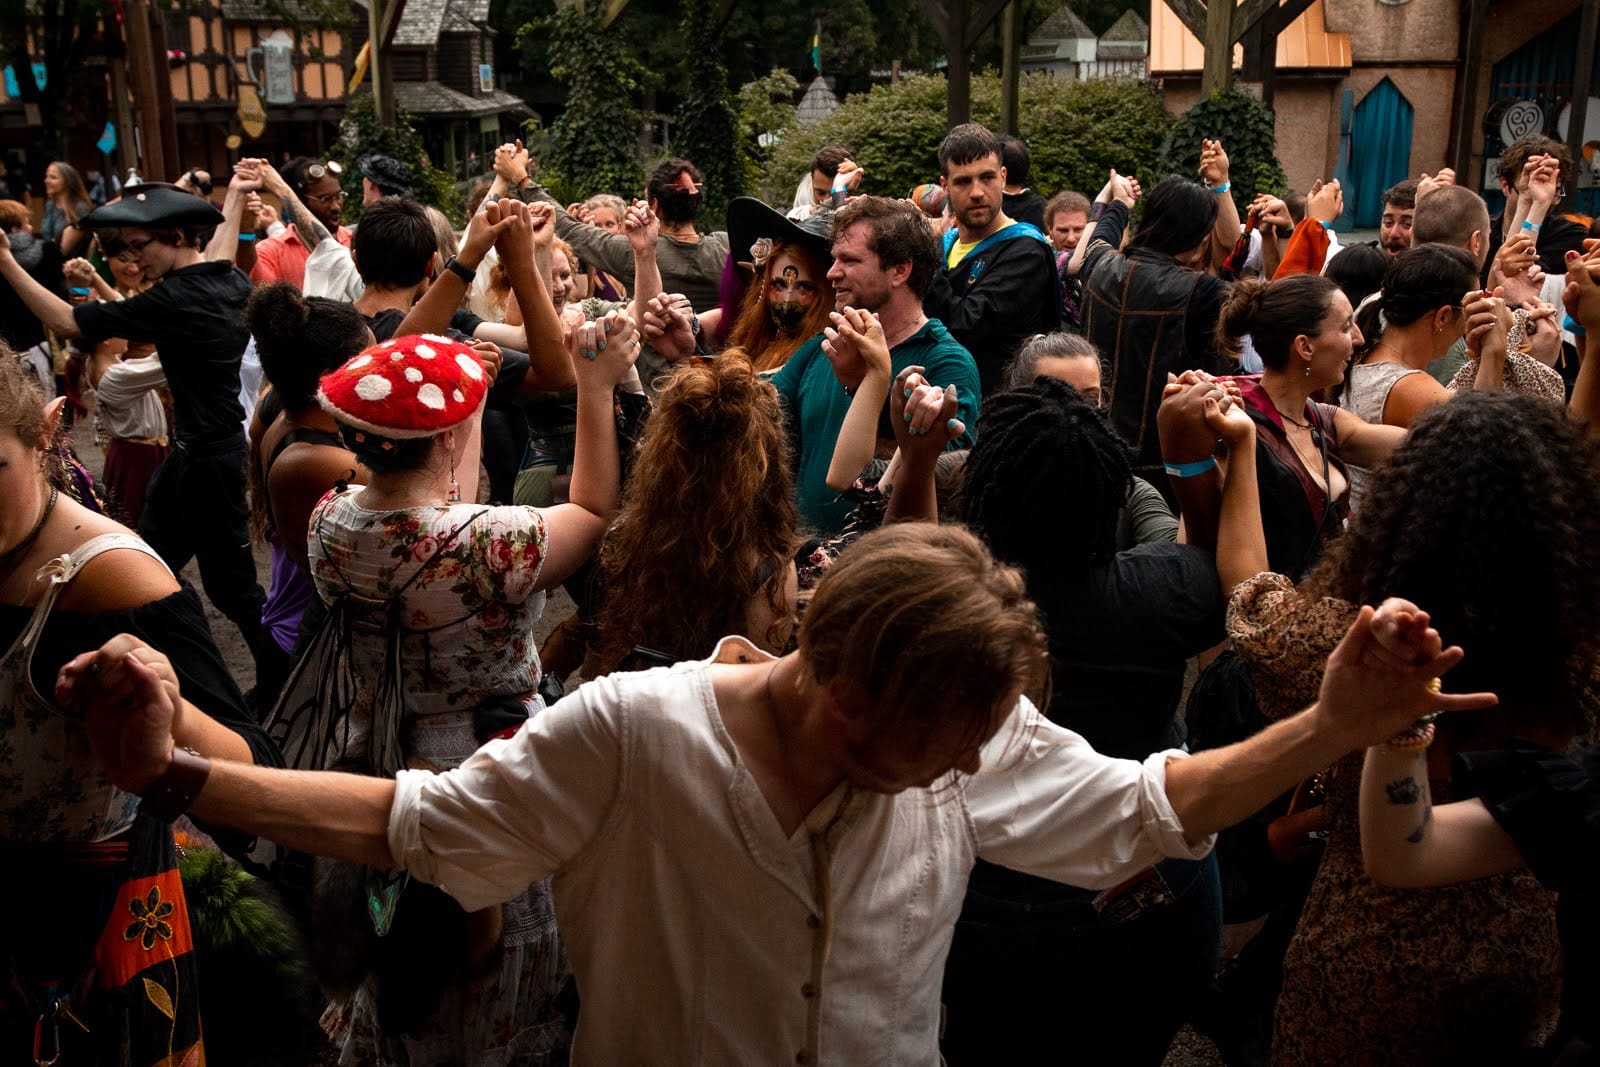 people in costumes dancing at a party